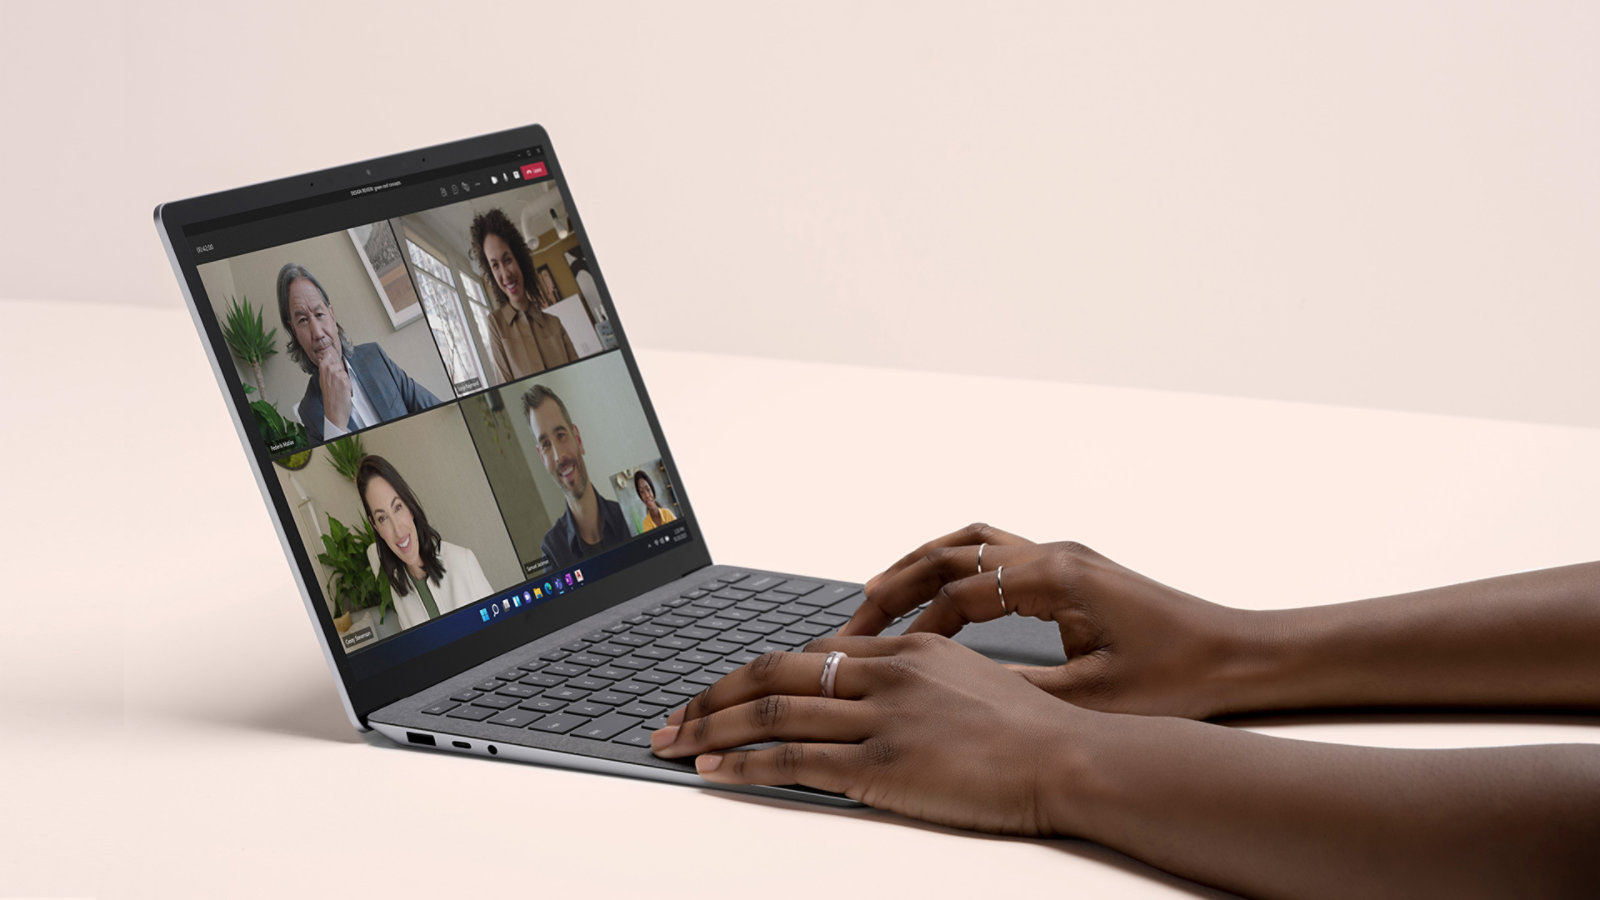 Microsoft Teams is observed on the screen of a Surface Laptop 4 device, with a person’s hands laid down on the keyboard